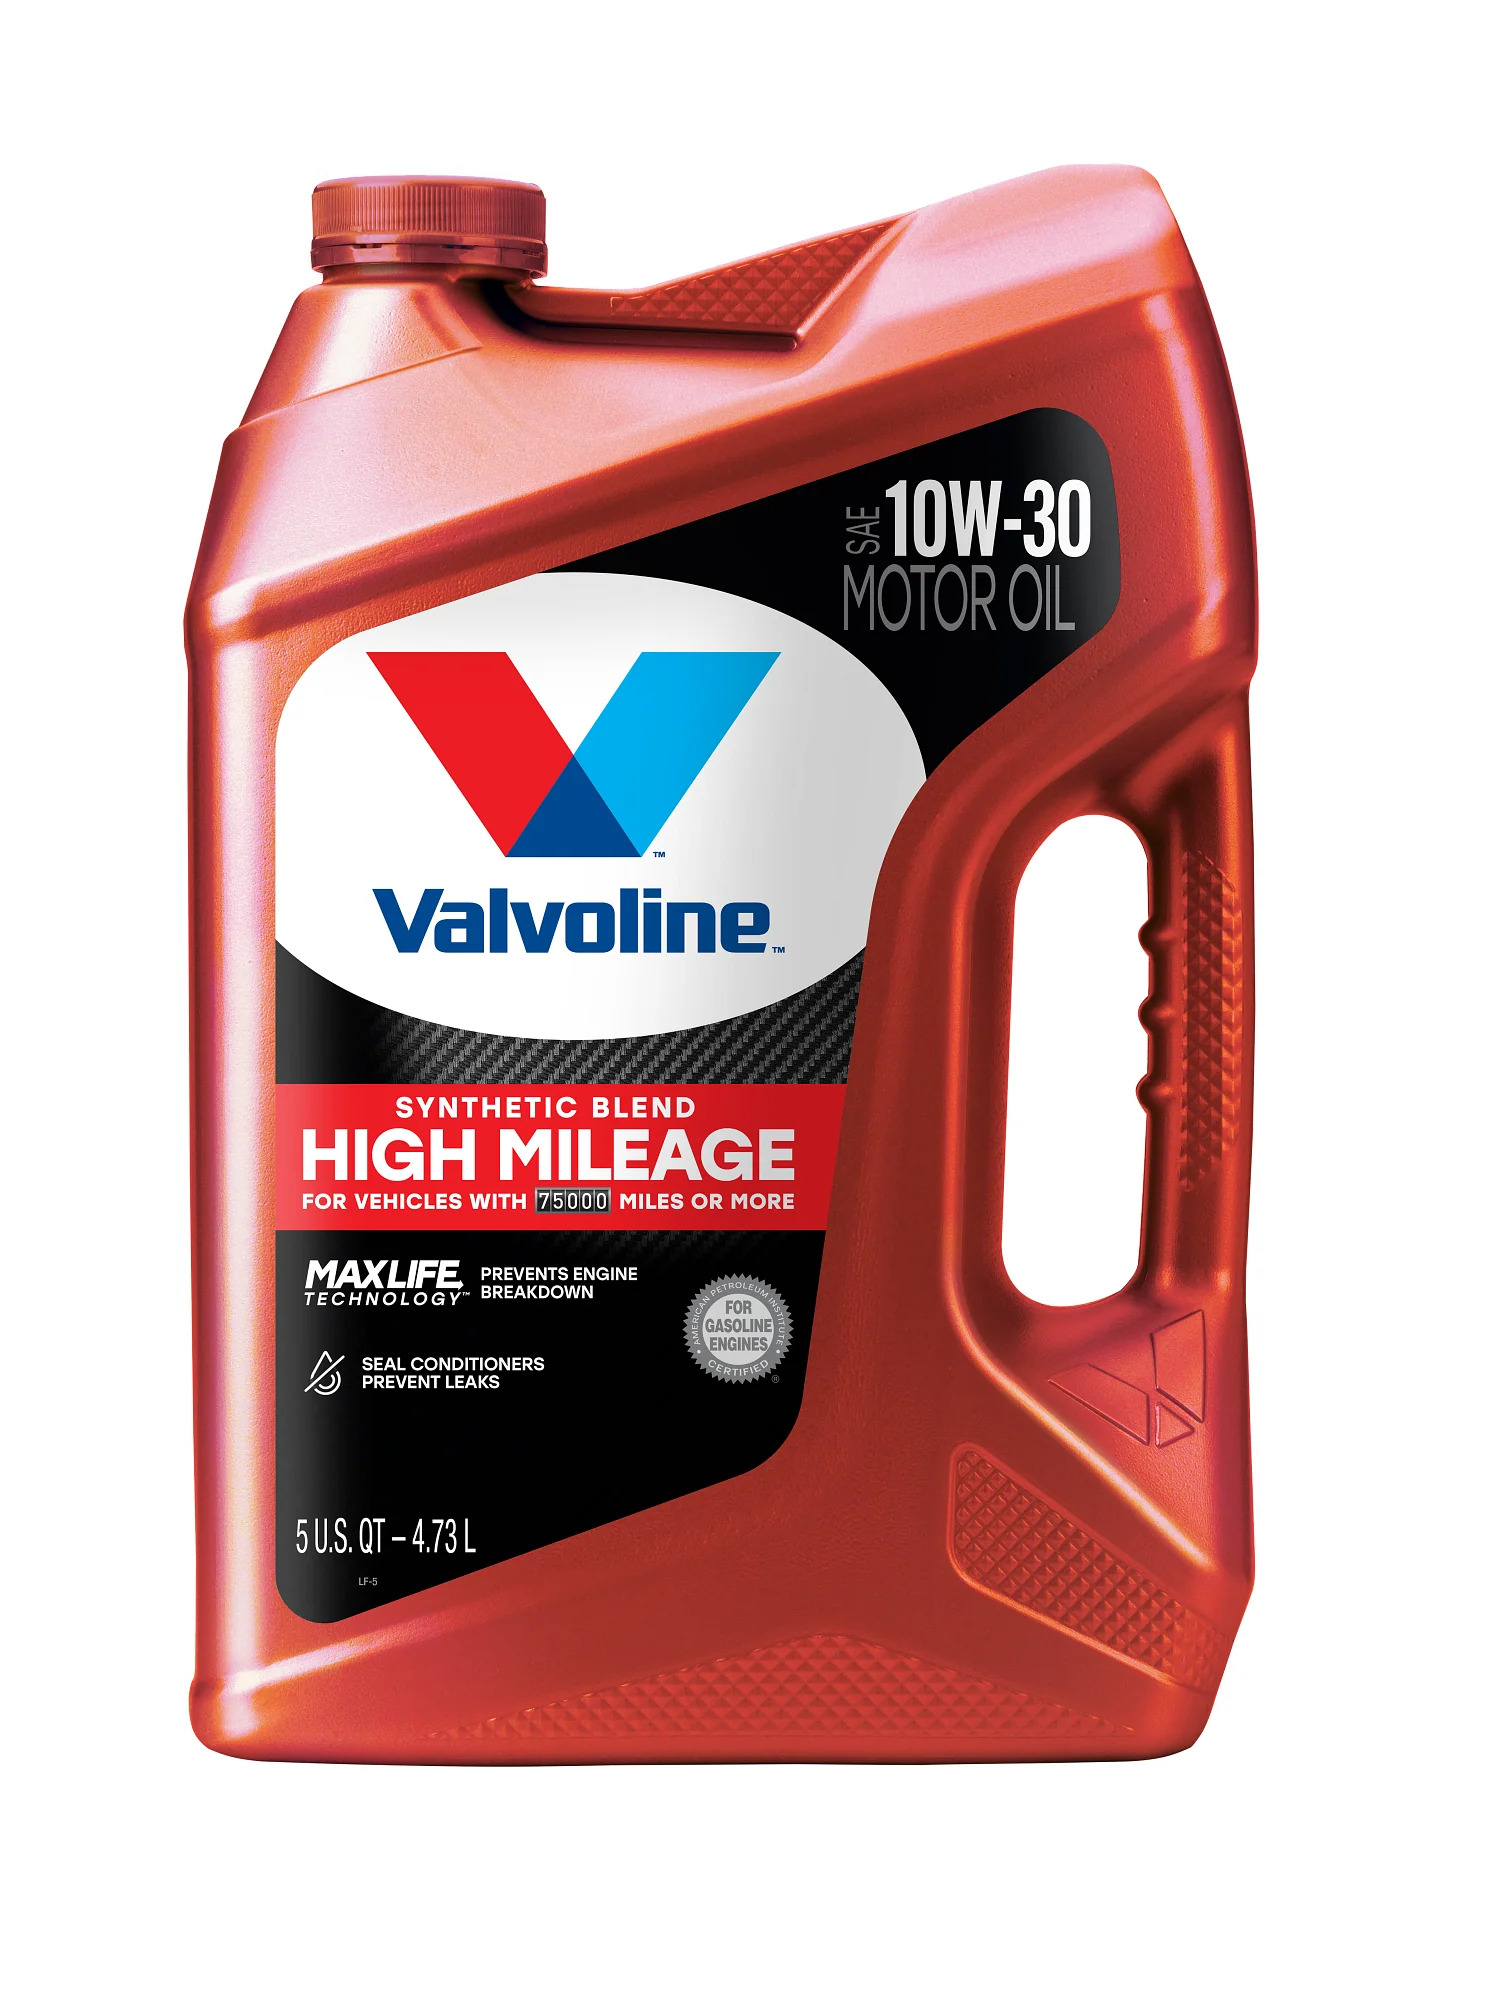 Valvoline High Mileage with MaxLife Technology Motor Oil SAE 10W-30 - image 1 of 10